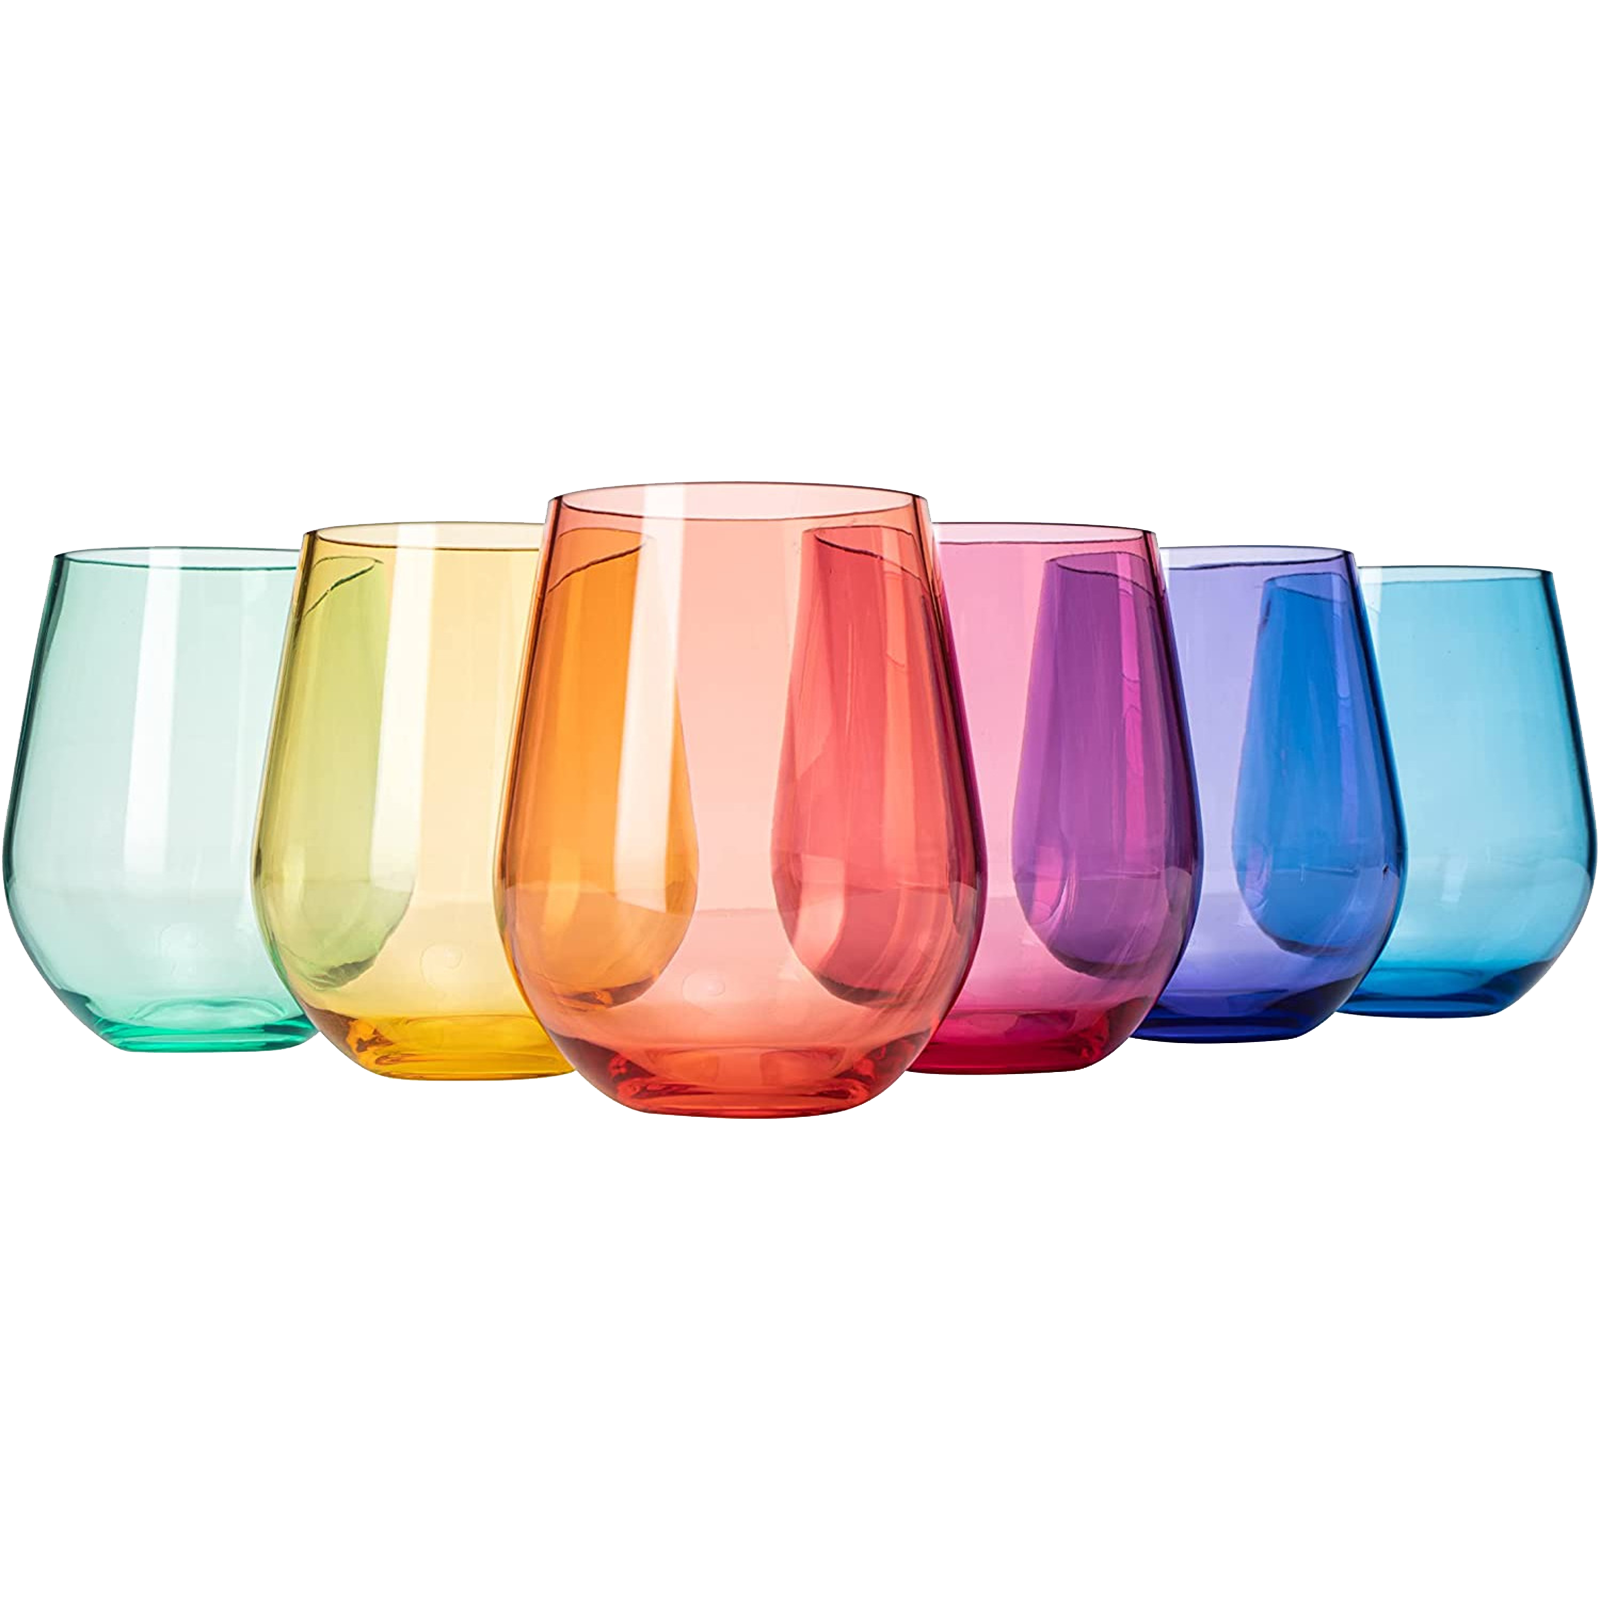 Crystal Clear Plastic Stemless Unbreakable Shatterproof Wine Glass Set of 4